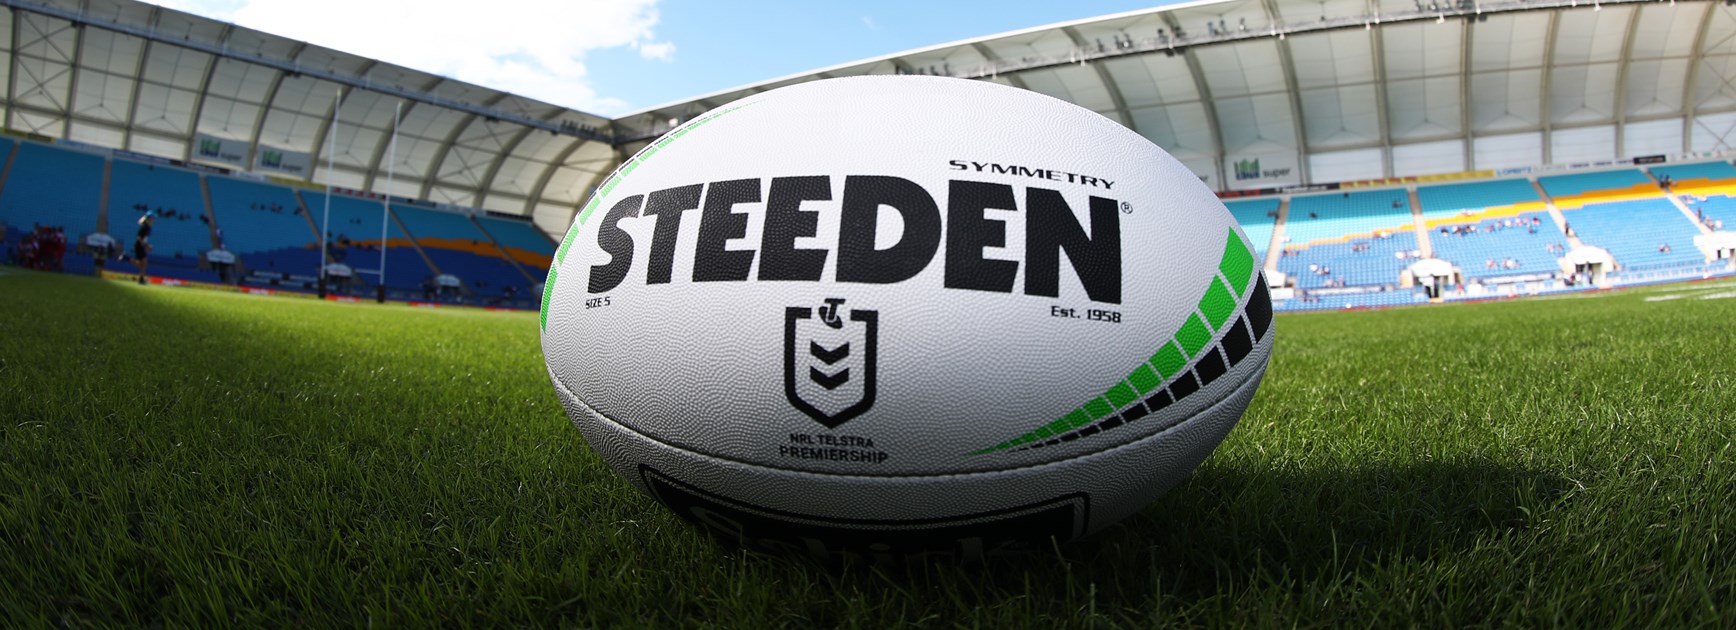 Venues confirmed for remaining Bulldogs fixtures